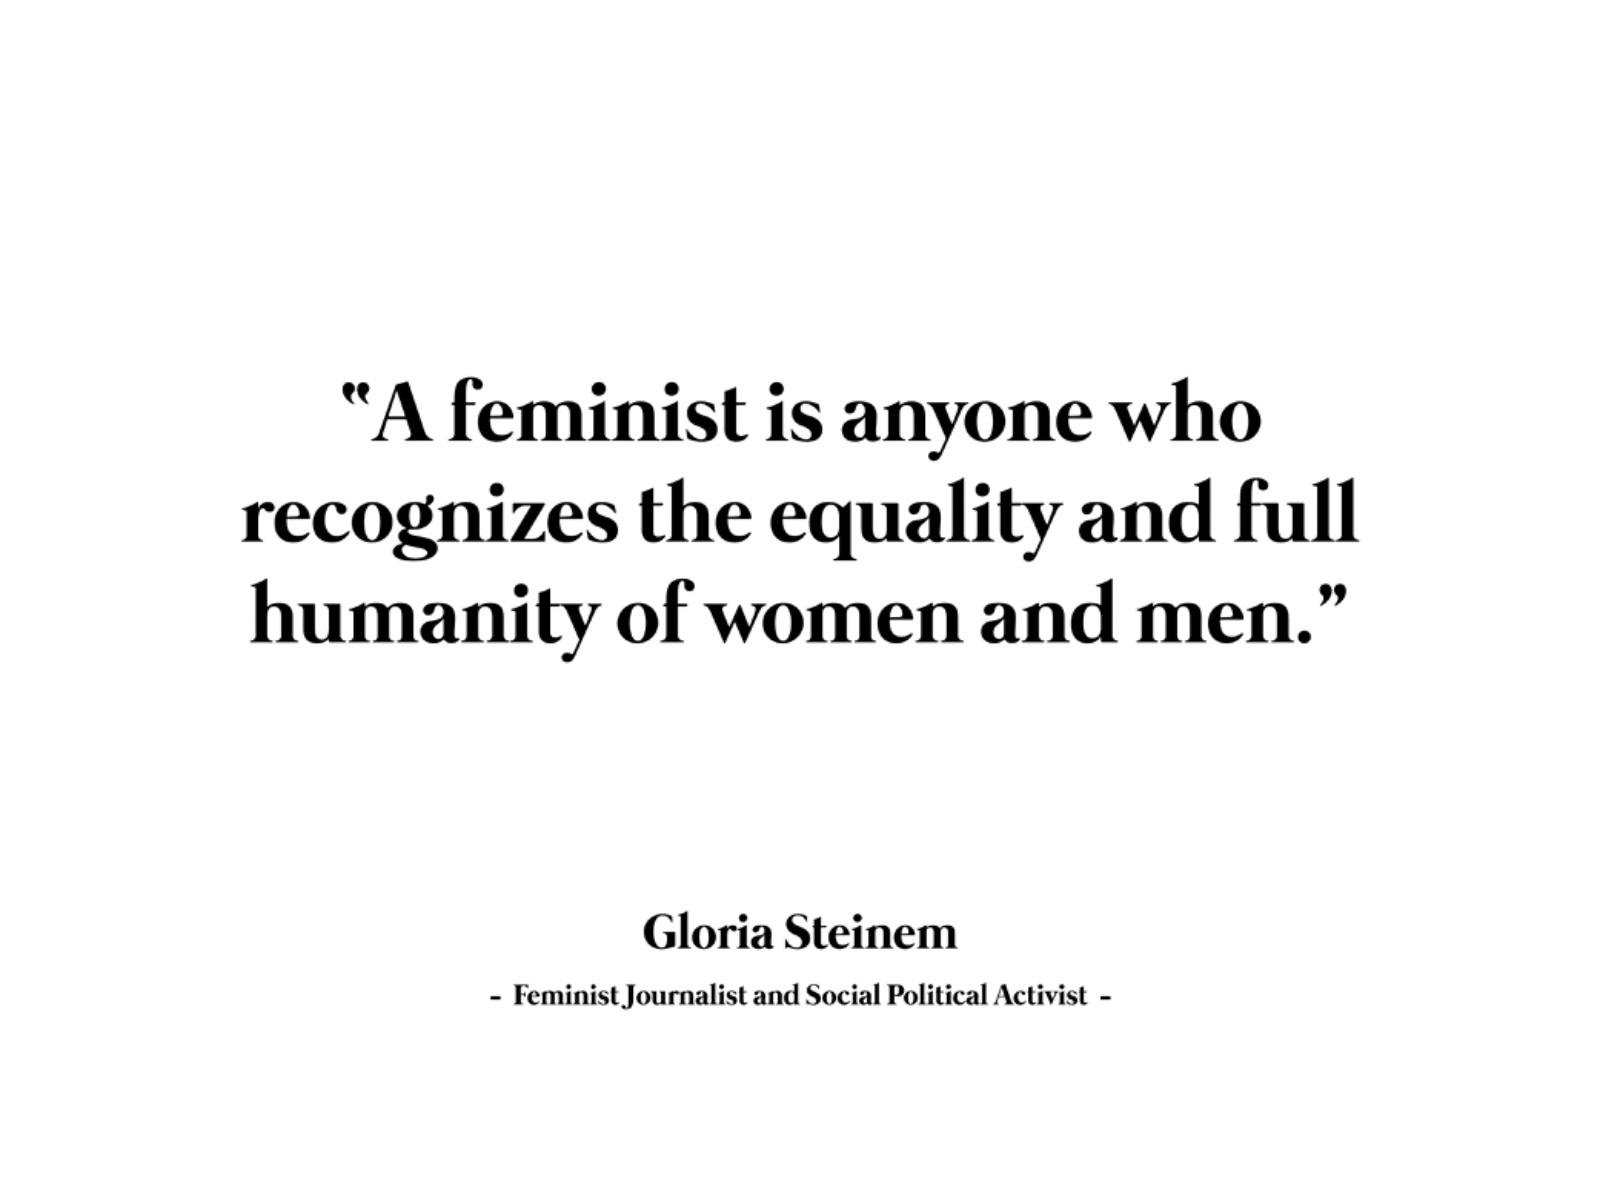 Citação de Gloria Steinem, “A feminist is anyone who recognizes the equality and full humanity of women and men.”